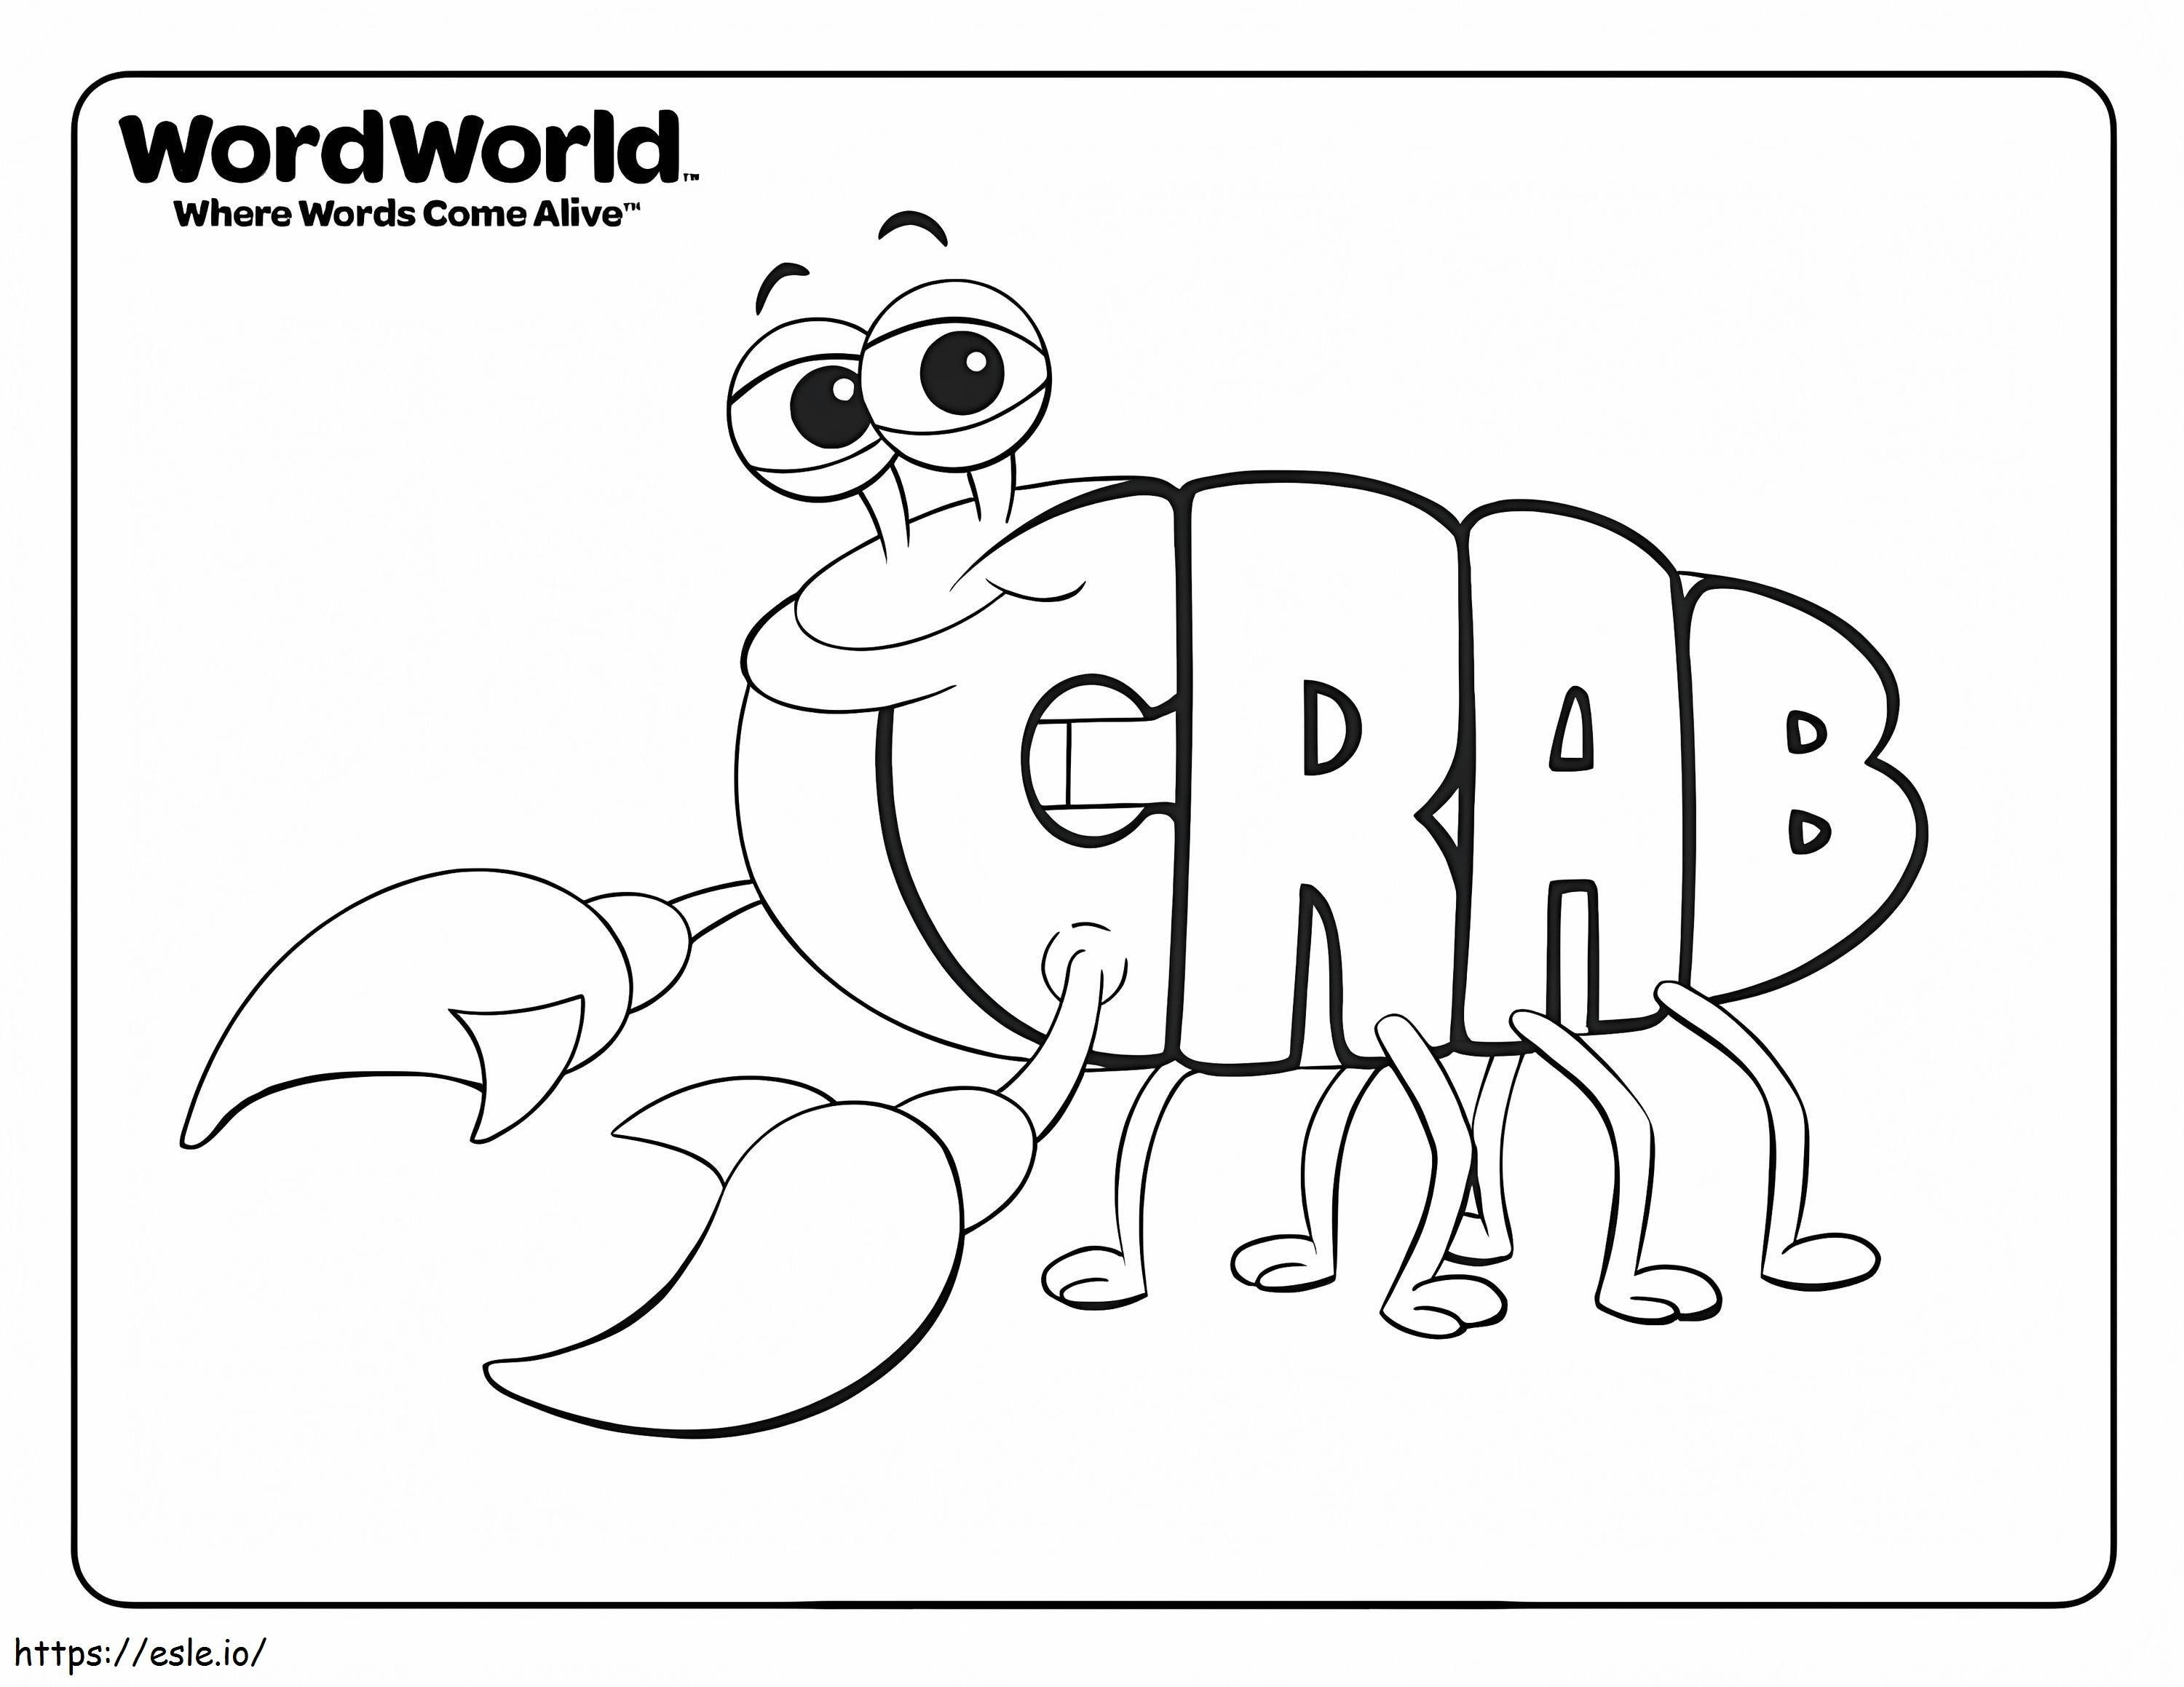 Smiling Crab coloring page